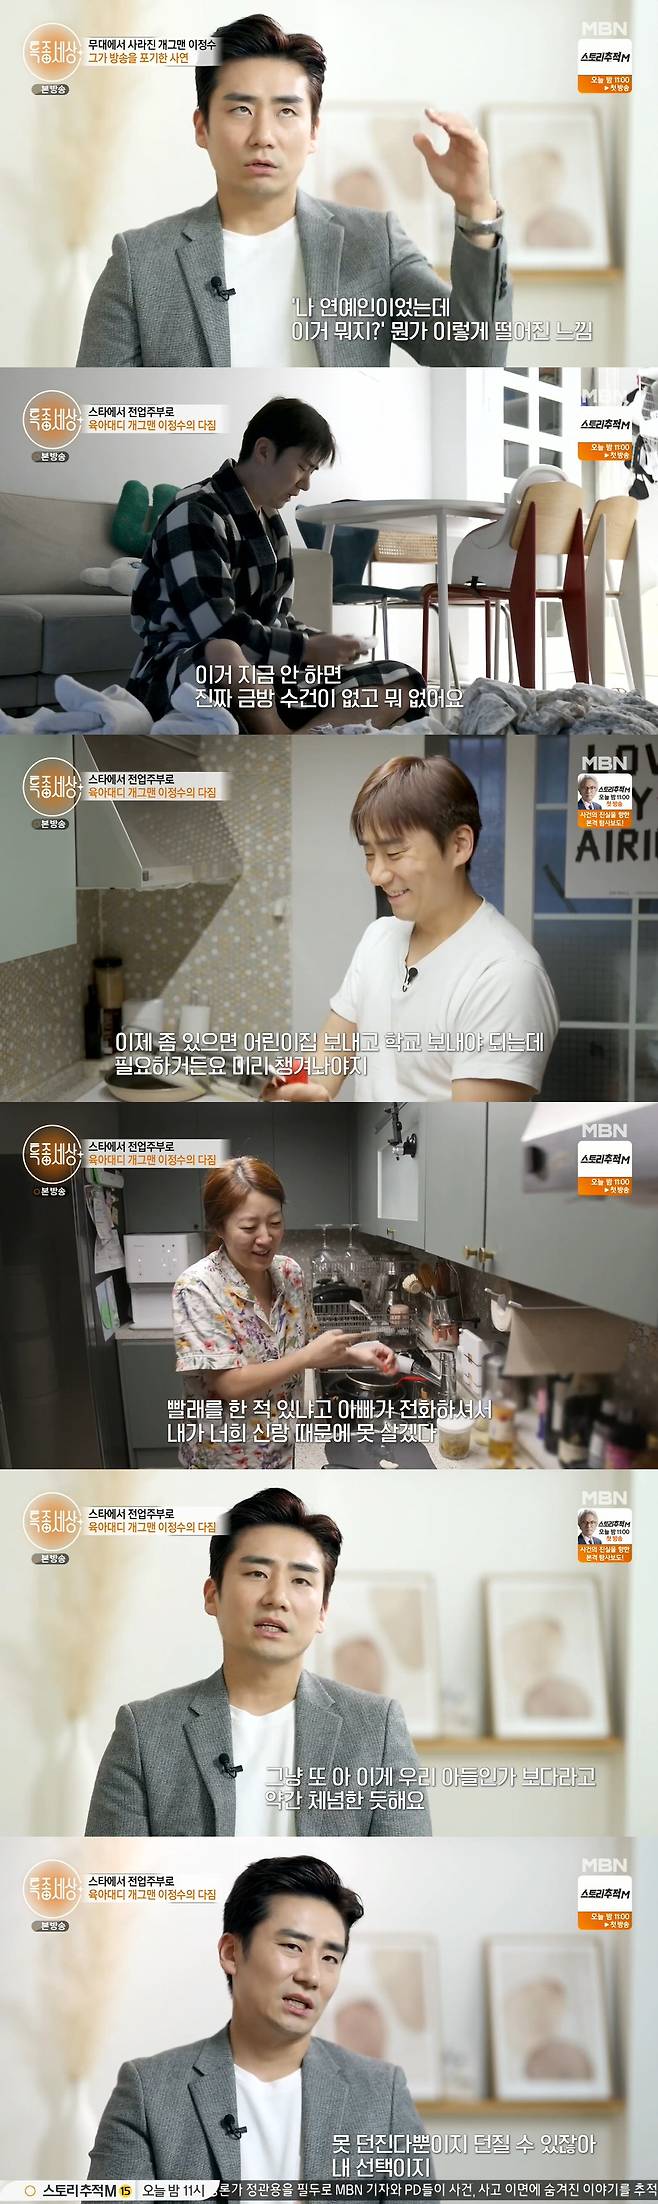 The comedian Lee Jung-soo told the story of becoming a full-time housewife.Lee Jung-soos daily life was revealed in the MBN liberal arts program Special World broadcast on the 7th.Lee Jung-soo, a father who raises two daughters aged nine and 16 months, prepared dinner for the children, not the skill of making fried rice once or twice.Lee Jung-soo was busy changing and washing his youngest daughters diapers while she was having dinner. After a while, Lee Jung-soo laughed at the sound of the door lock.My wife, an advertising stylist, told Lee Jung-soo, I have to prepare for the advertisement tomorrow all day, so I have to go out at 10 am.Ive got half Haru less work (than my husband) and its harder to live than working outside, he told the production team, thanking Lee Jung-soo, who is in charge of living.Lee Jung-soo moved diligently throughout the night, cleaning up the laundry that all of his family fell asleep, and cleaning the lunch box before his daughters school in the early morning and organizing the water bottle.The wife said, When the children wake up in the morning, they do not find me well. My Father takes me to school and does not find my mother.My mom tells my Father, What are you doing in this West? And my Father says, I cant live because of your groom.Lee Jung-soo said, I cried a lot because I lost my job and it was a lot of hard work. It was a kind of run.My wife is making a good job and my child is born, so I wanted to be a full-time housewife. I was a celebrity, but what is this?I felt self-esteem. It seemed to have given me a good time. It was a moment I could see coolly. The reason for the hardship of the house is because I was deprived of my freedom.I can throw outside work. It is too hard to have a choice here. Lee Jung-soo said, My mother wanted her son to become a star again as an entertainer. Now she is less than before.I think I resigned, he said.